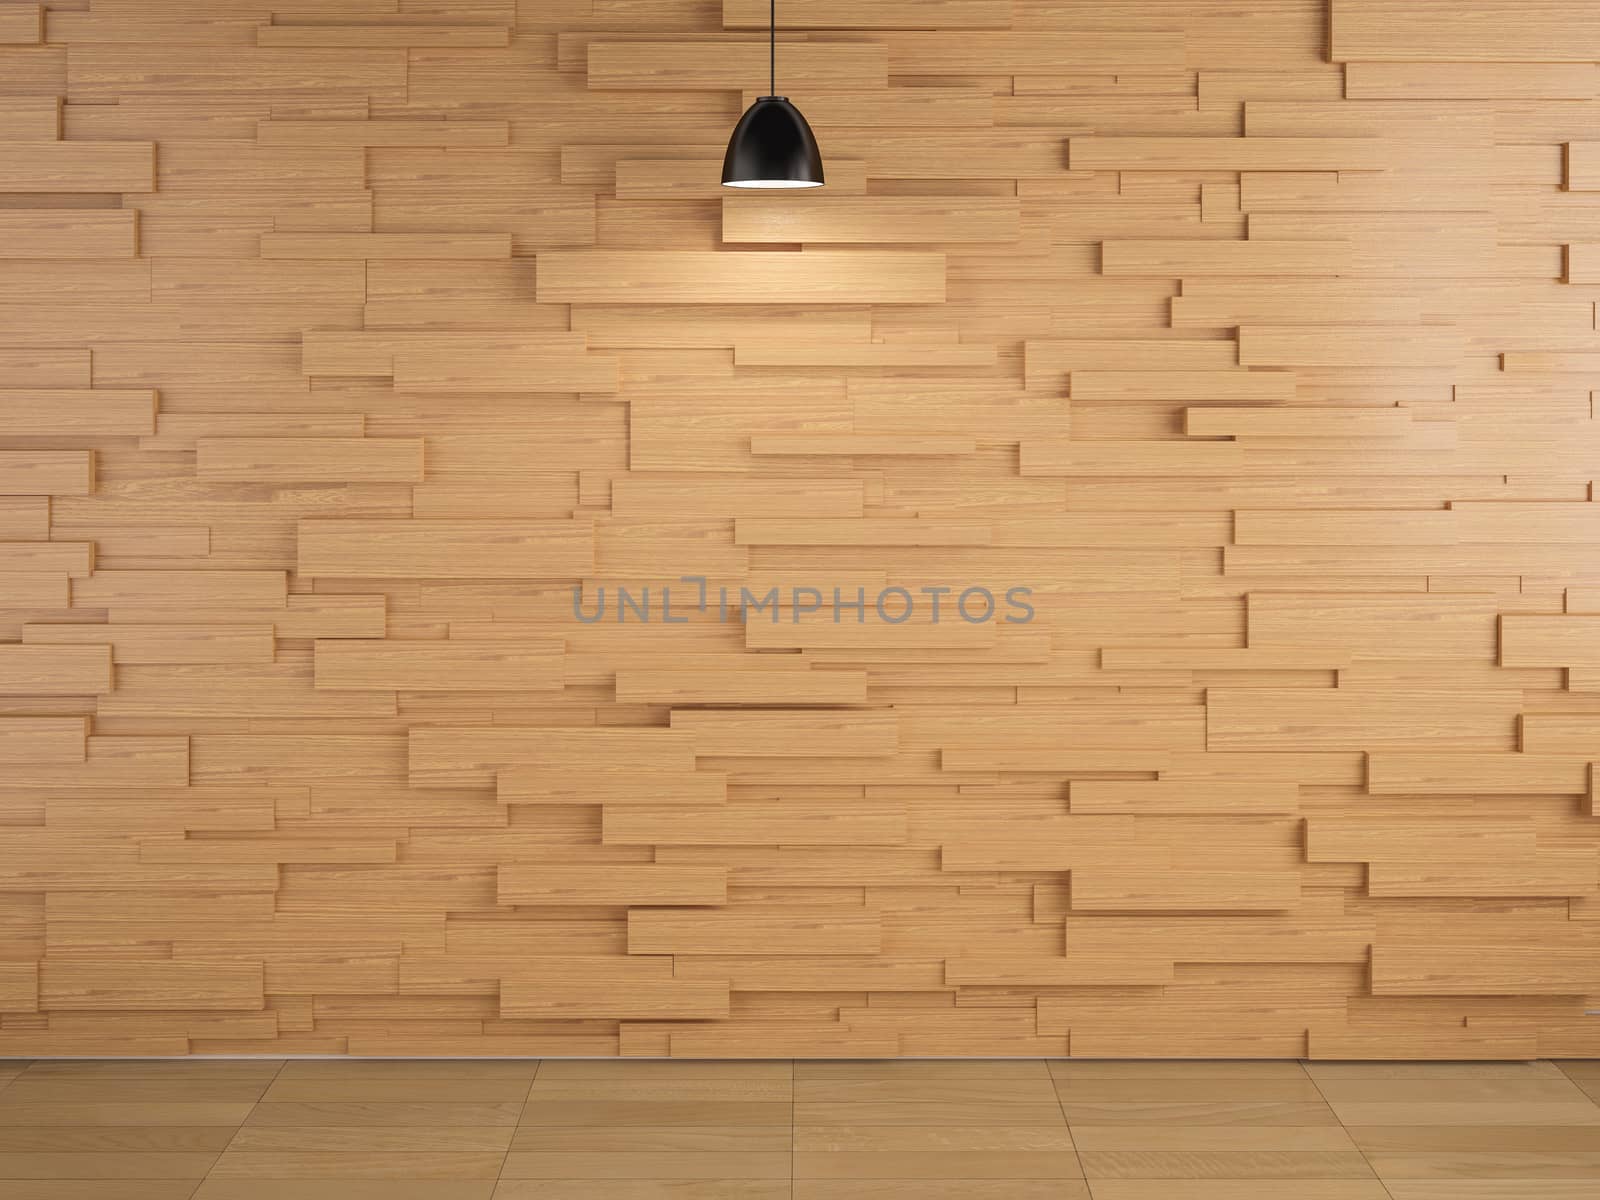 lamp and wood wall design and floor background, 3d redering by blackzheep